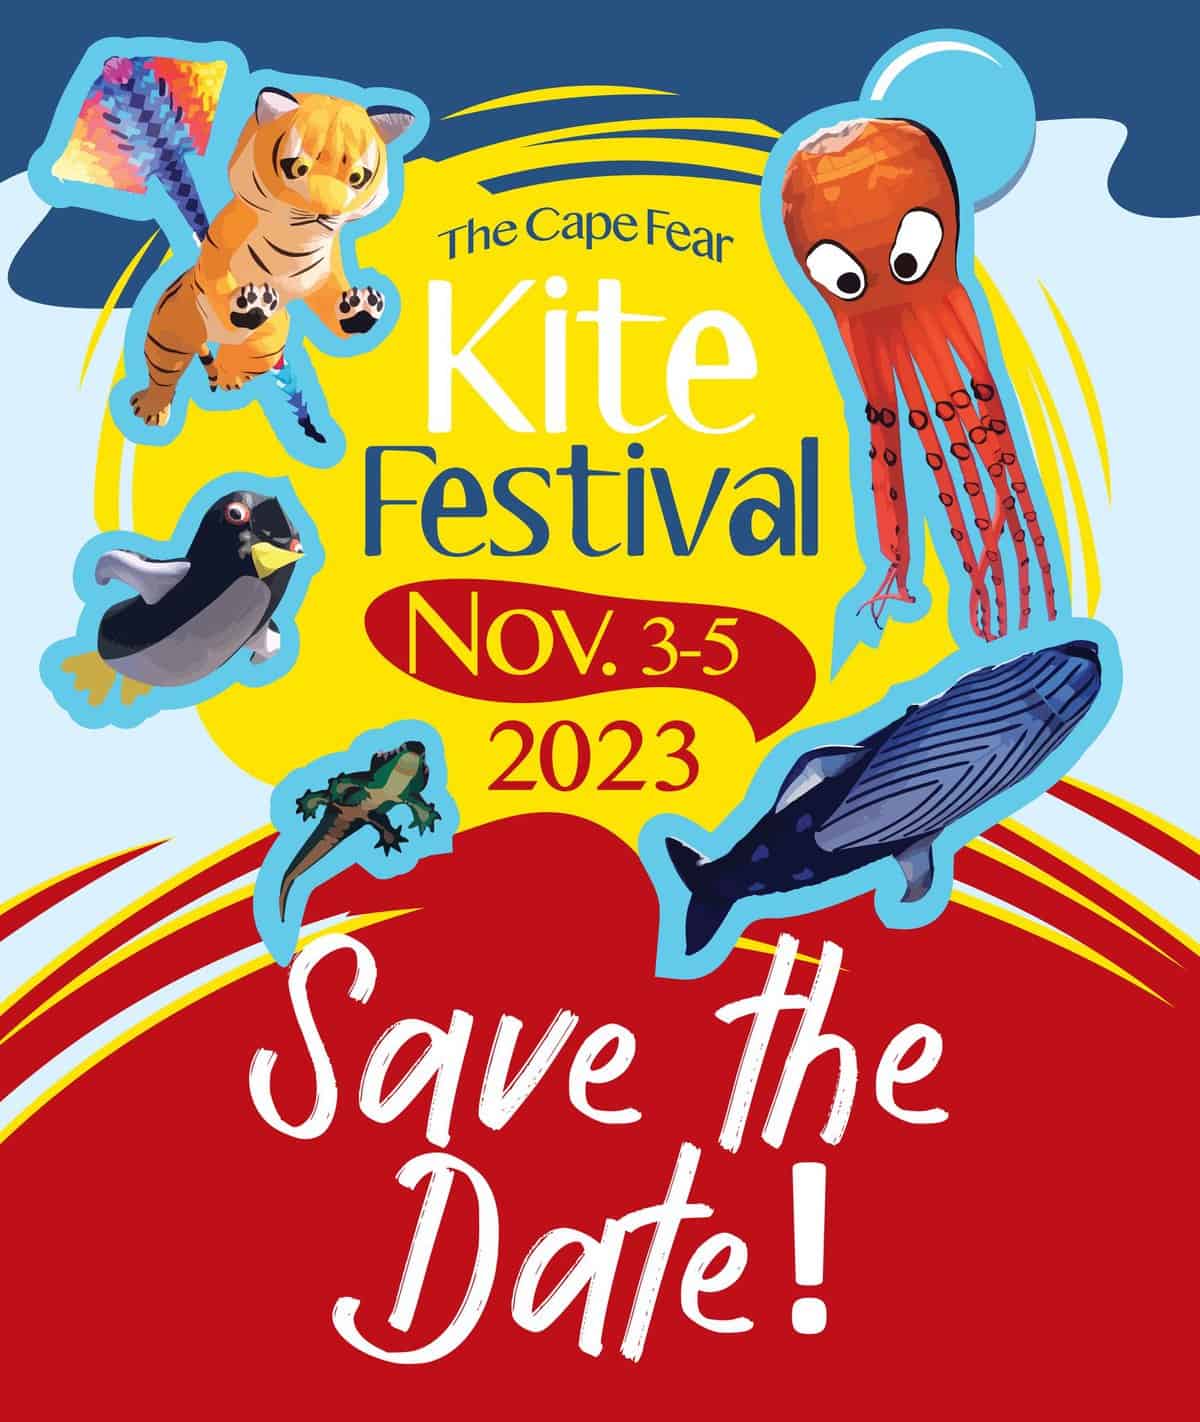 Save the Date for the 2023 Cape Fear Kite Festival in Fort Fisher